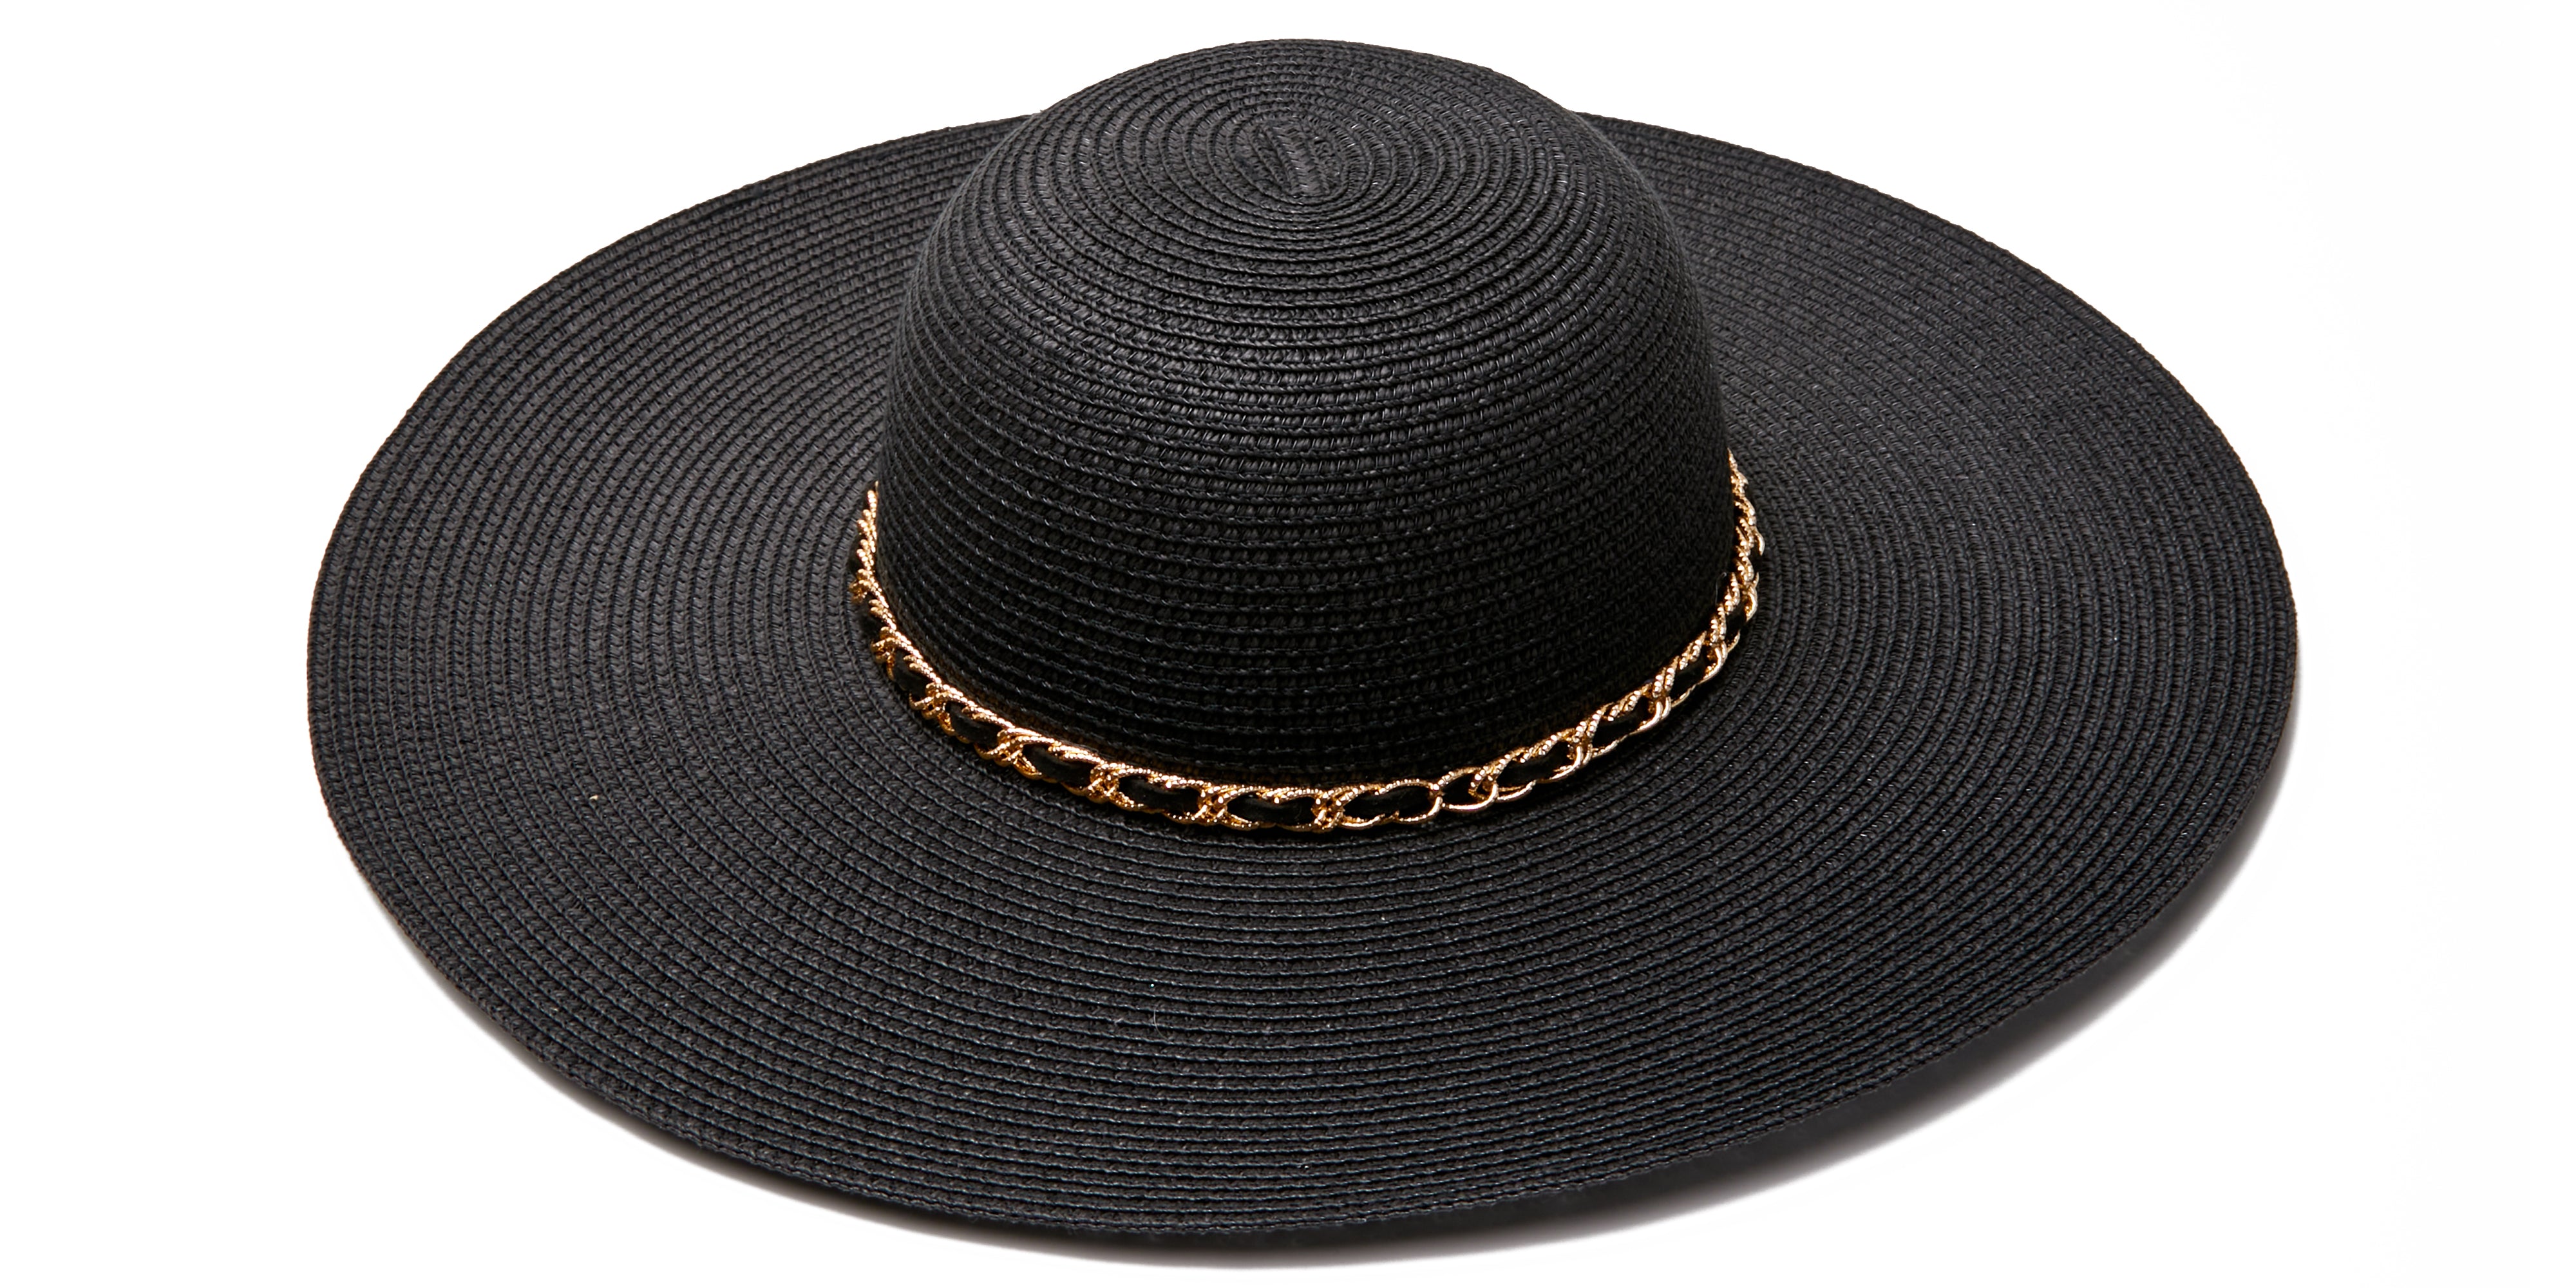 Classic Wide Brim Straw Hats - Wide Floppy Hats with Metal Chain - black